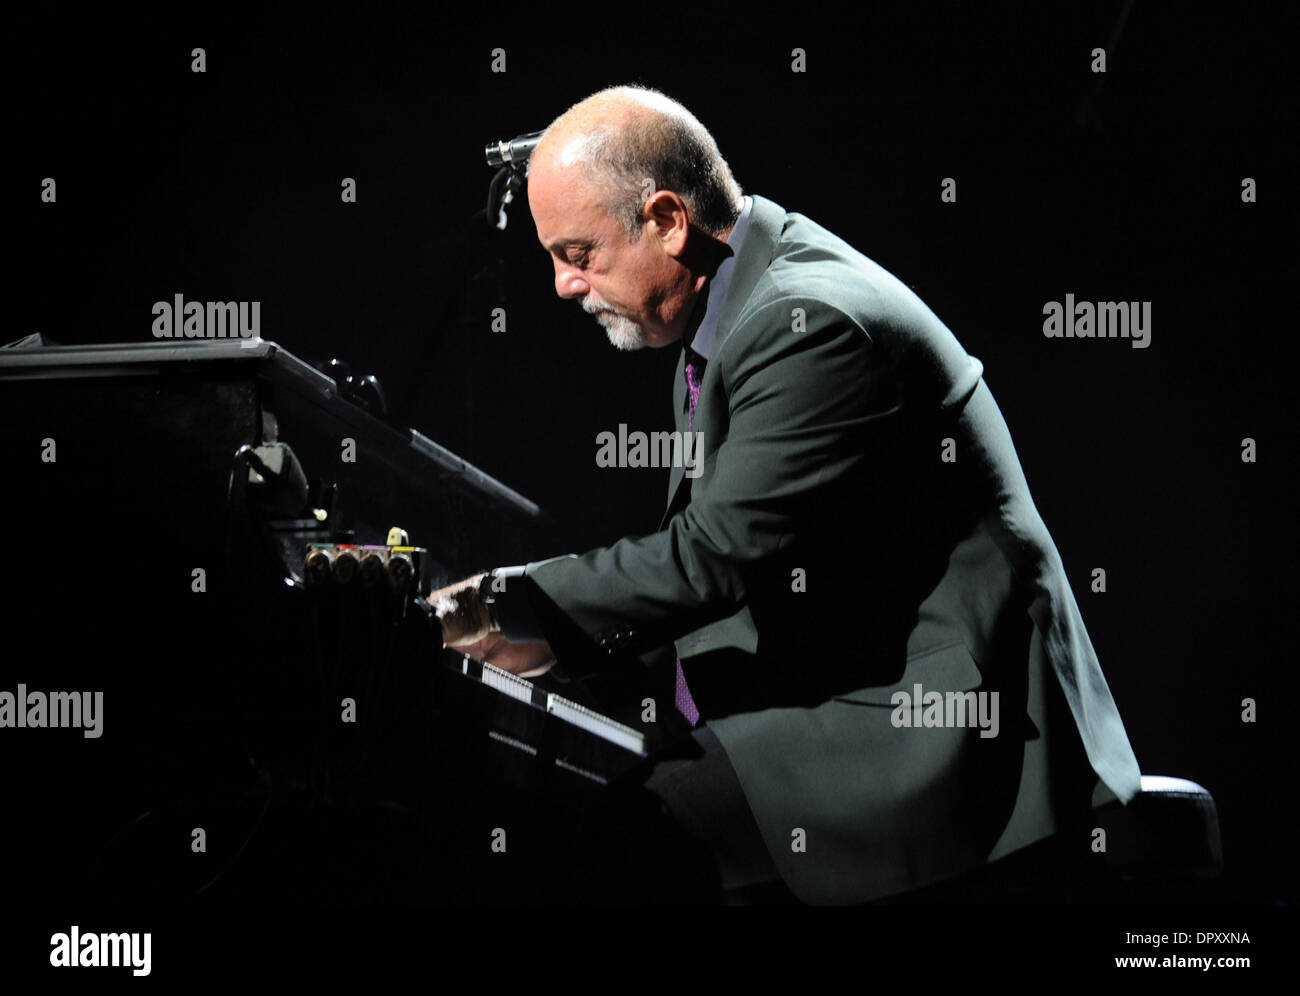 Mar 07, 2009 - Charlotte, North Carolina, USA - Musician BILLY JOEL performs live as his 2009 Face 2 Face tour with Elton John makes a stop to a sold out audience at The Time Warner Cable Arena located in downtown Charlotte. (Credit Image: © Jason Moore/ZUMA Press) Stock Photo